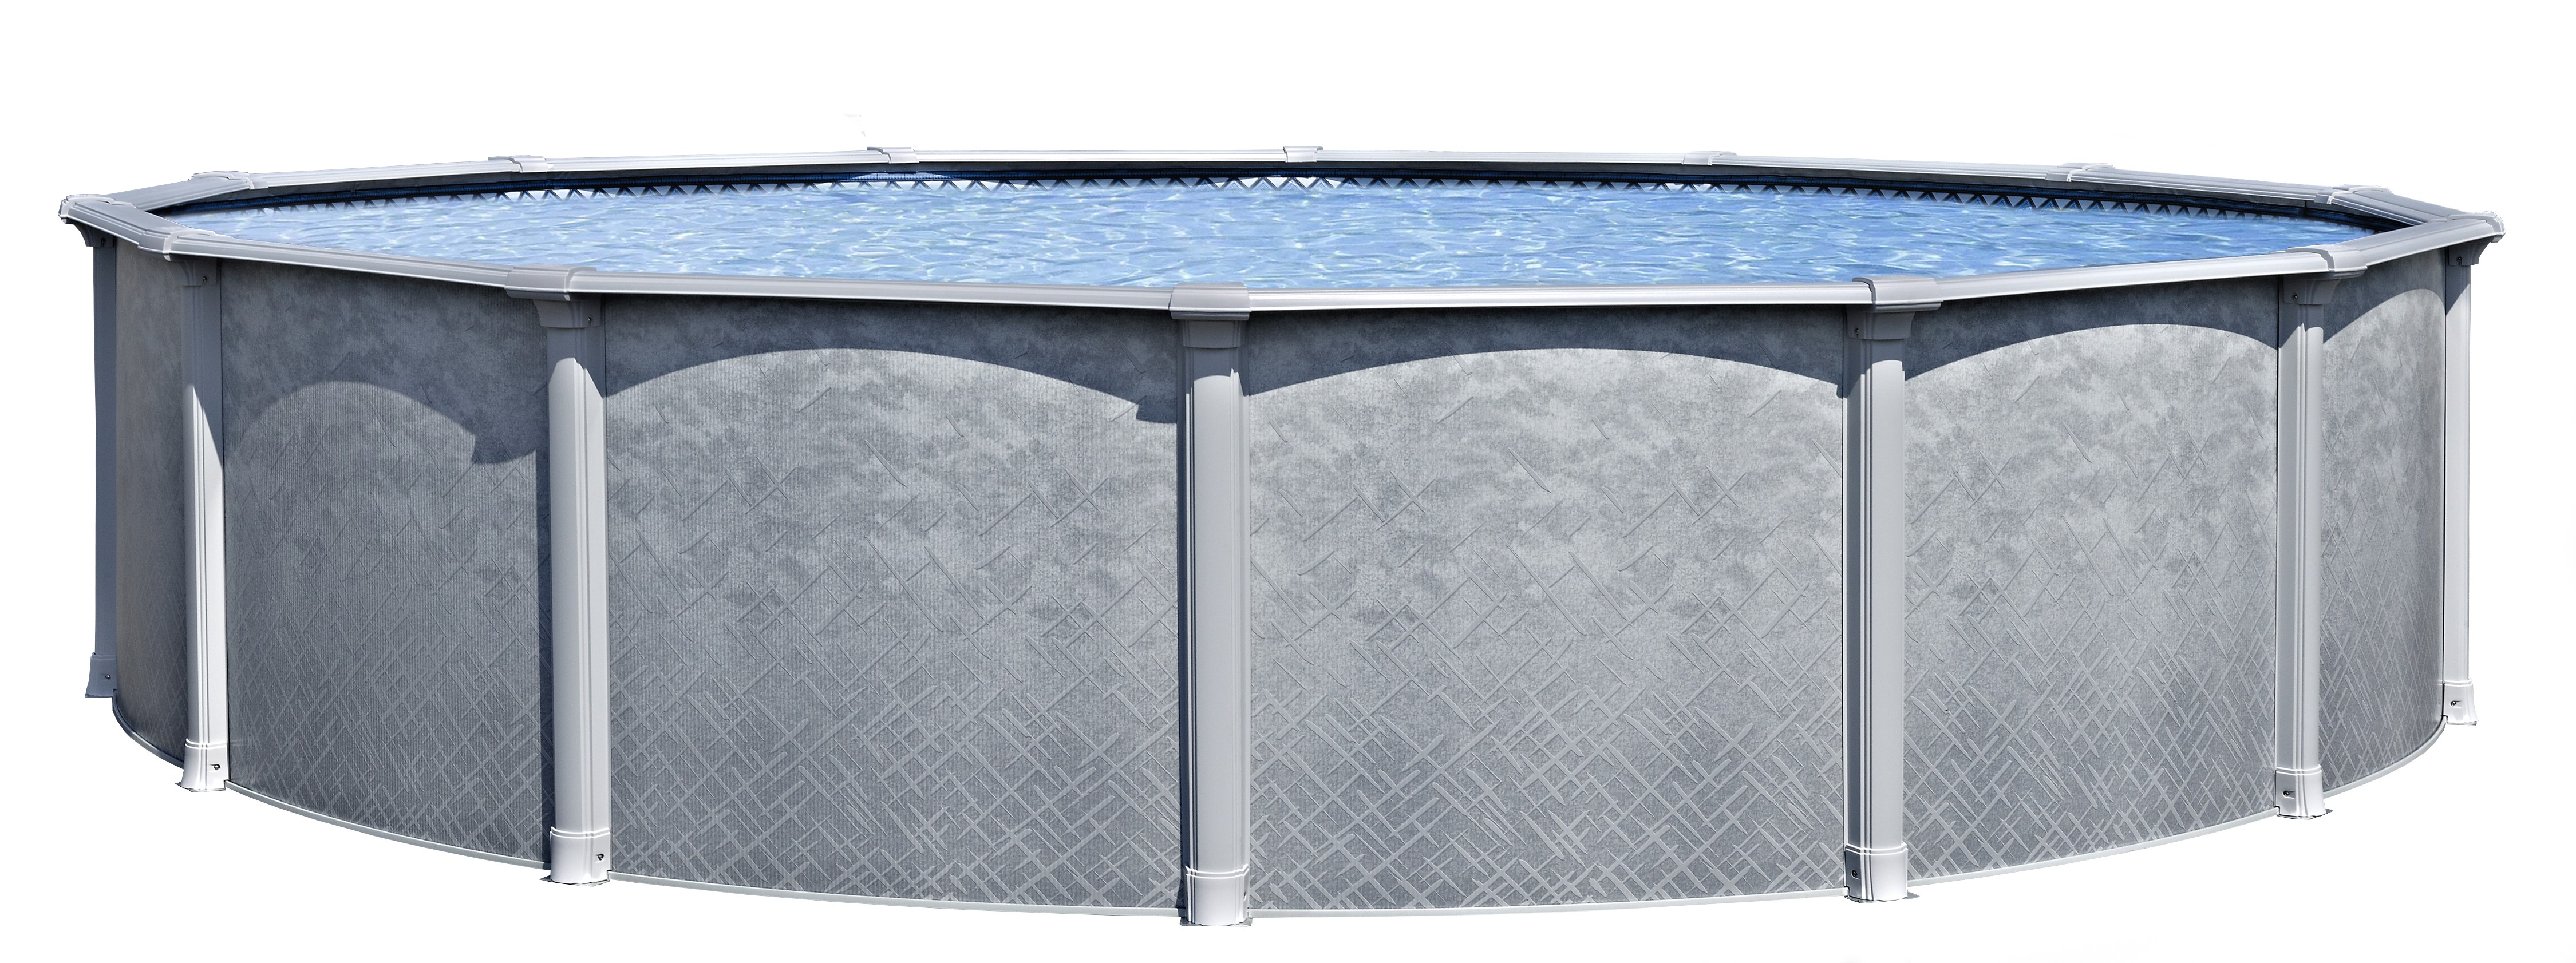 Lifestyle by Lake Effect ® Pools Round Above Ground Pool Kit.